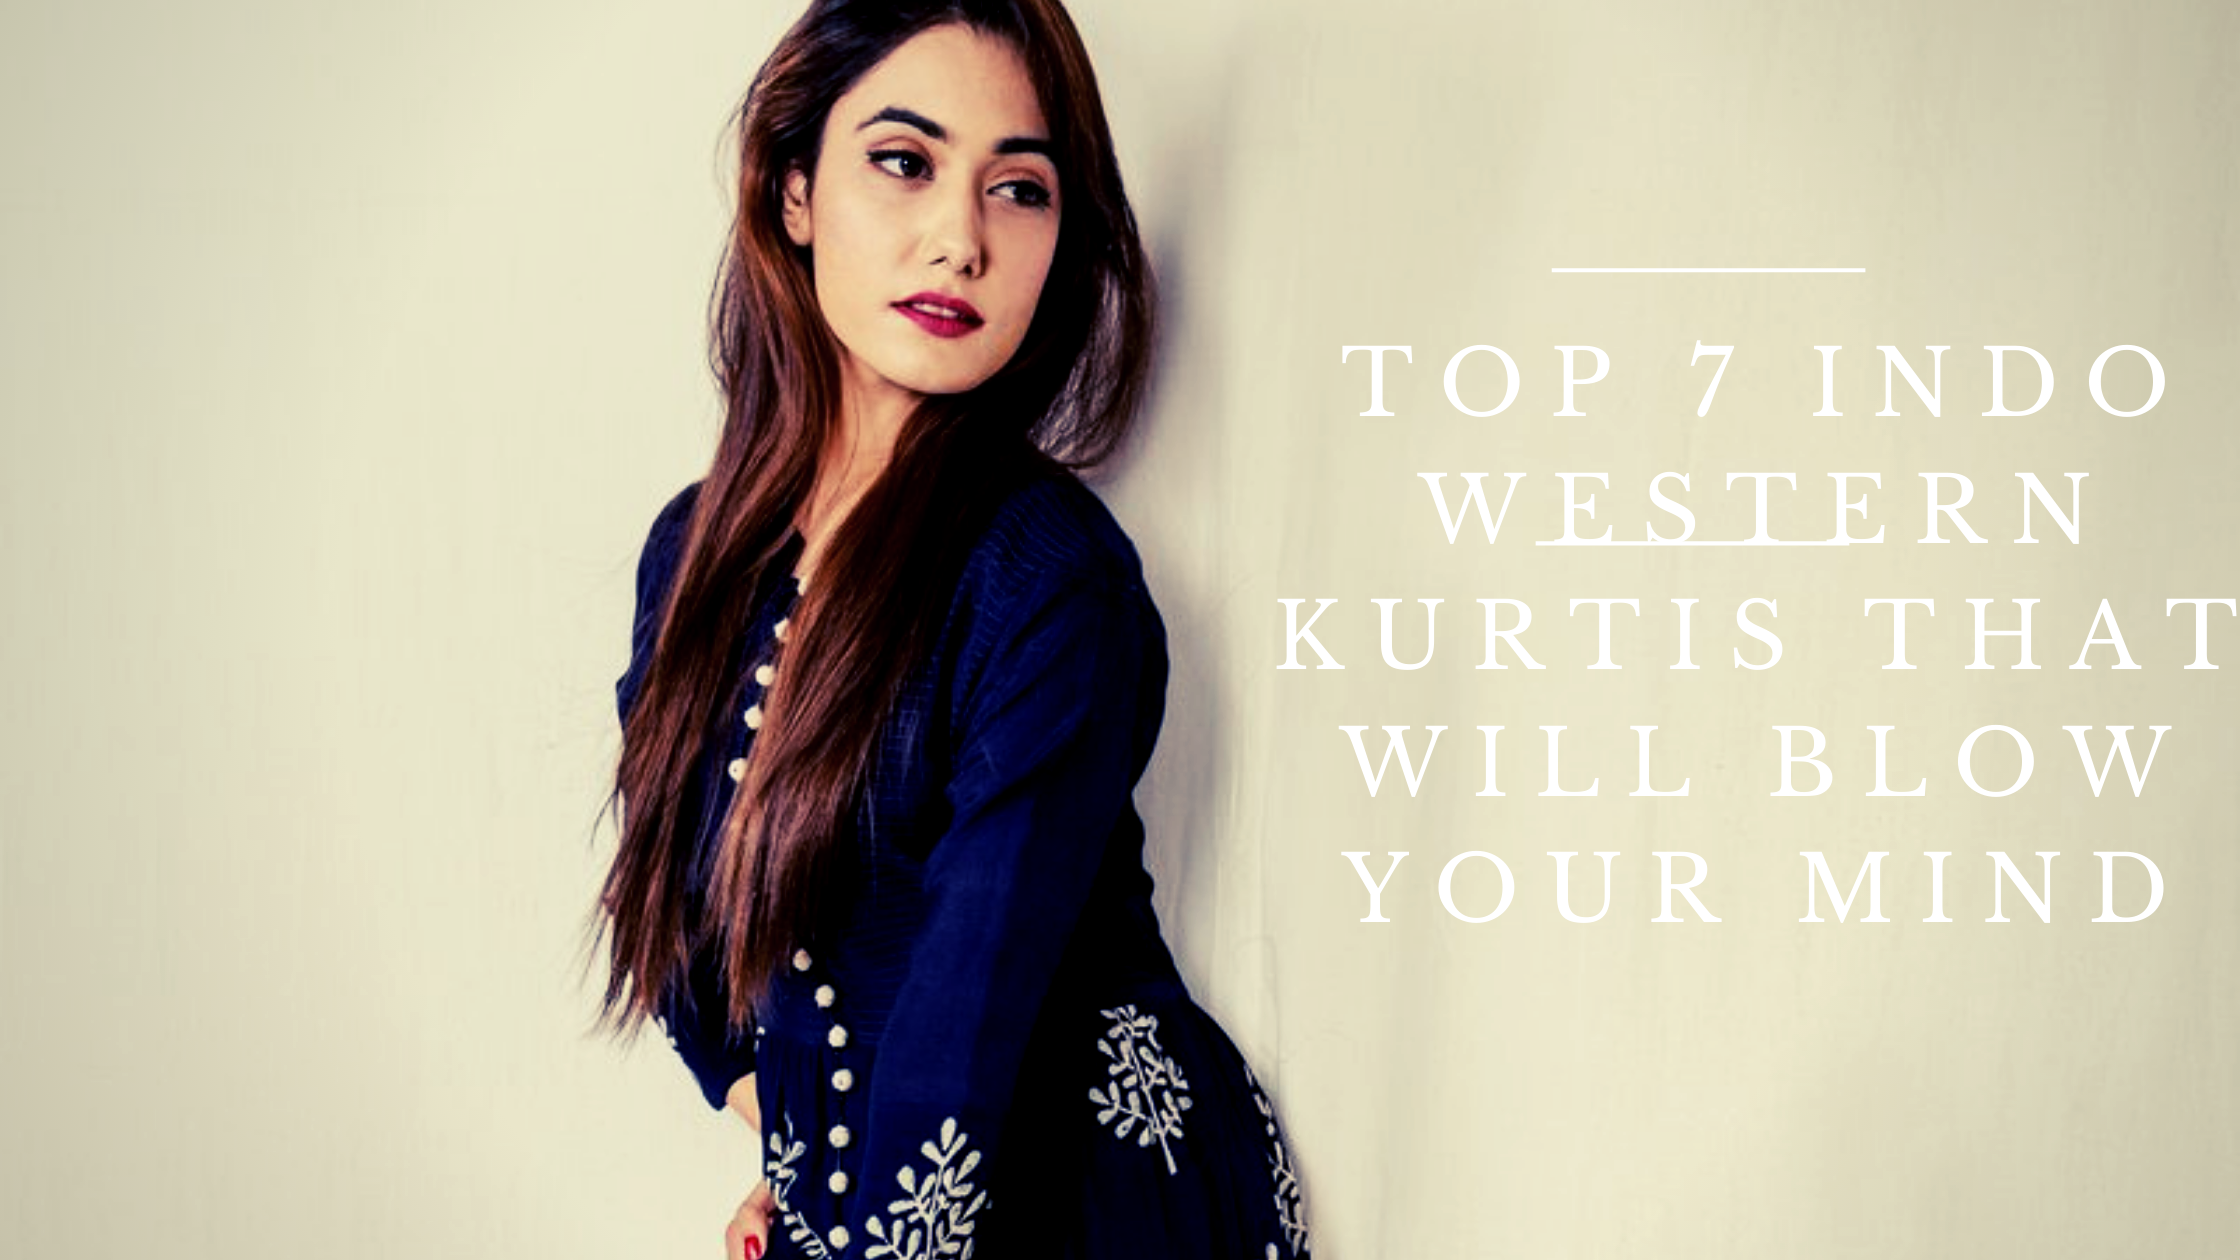 Top 7 Indo Western Kurtis that will blow your mind